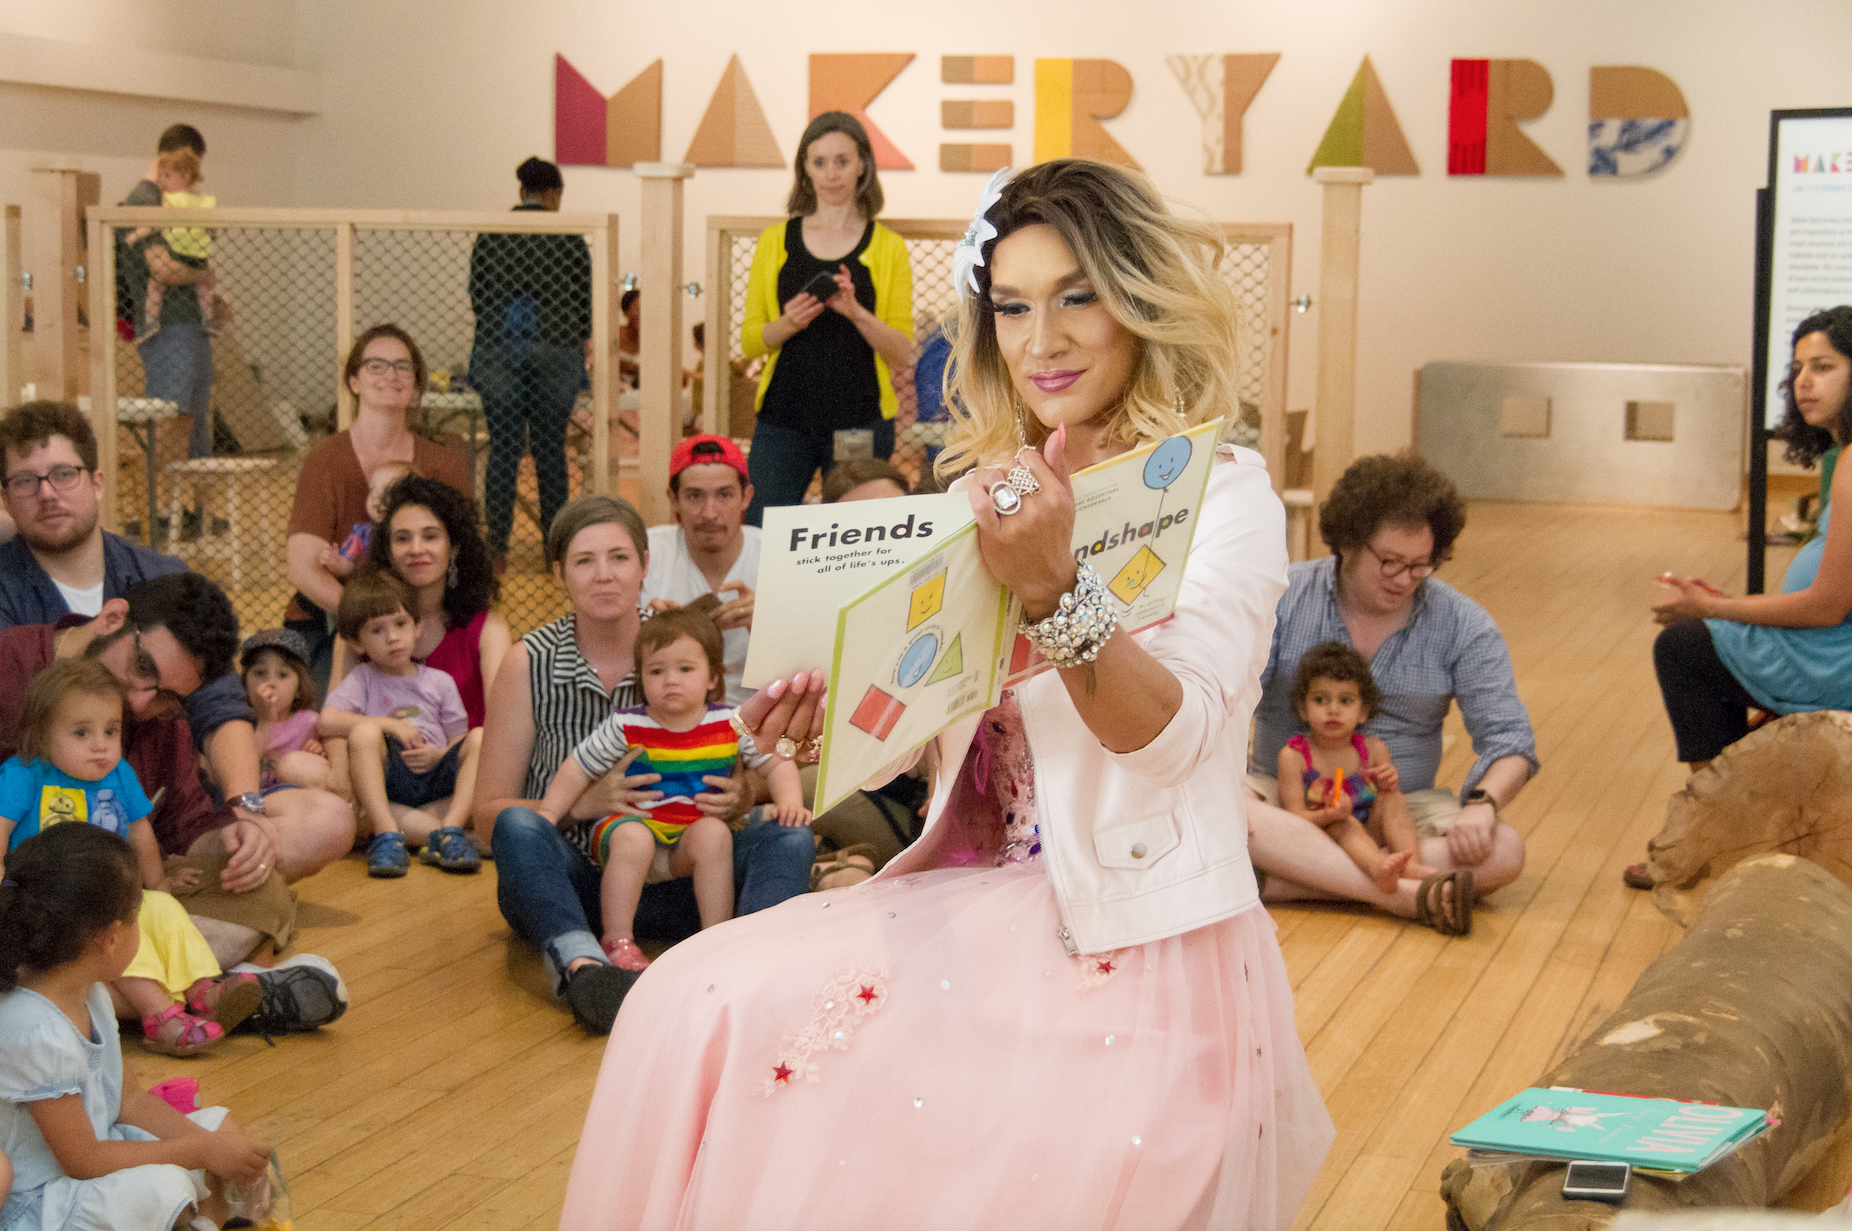 Drag queen story hour at local library sparks outrage in Gerritsen Beach